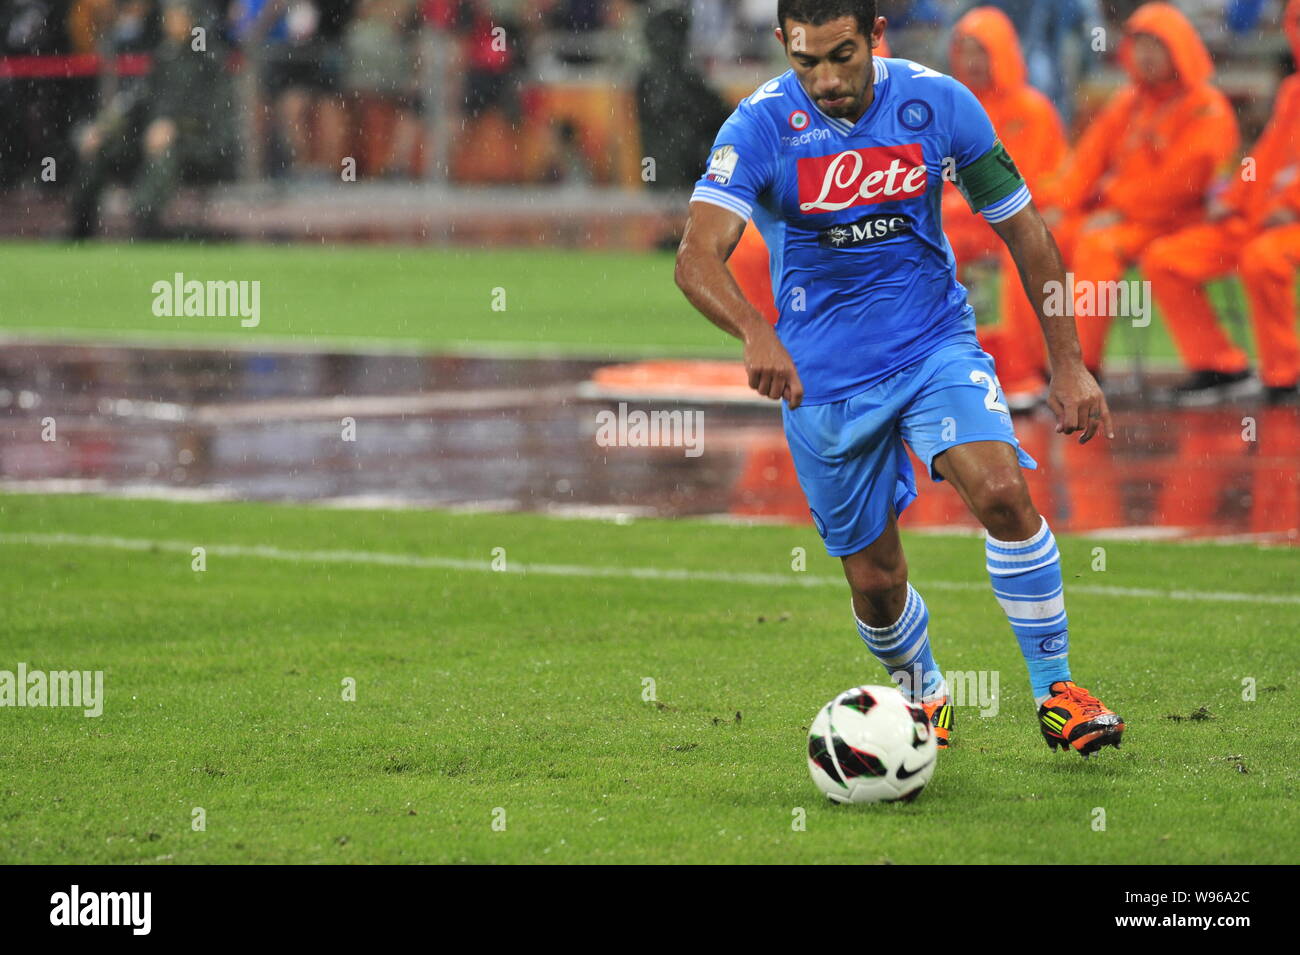 Walter Alejandro Guevara Gargano of Napoli dribbles against Juventus during their Italian Super Cup football match at the National Stadium, also known Stock Photo